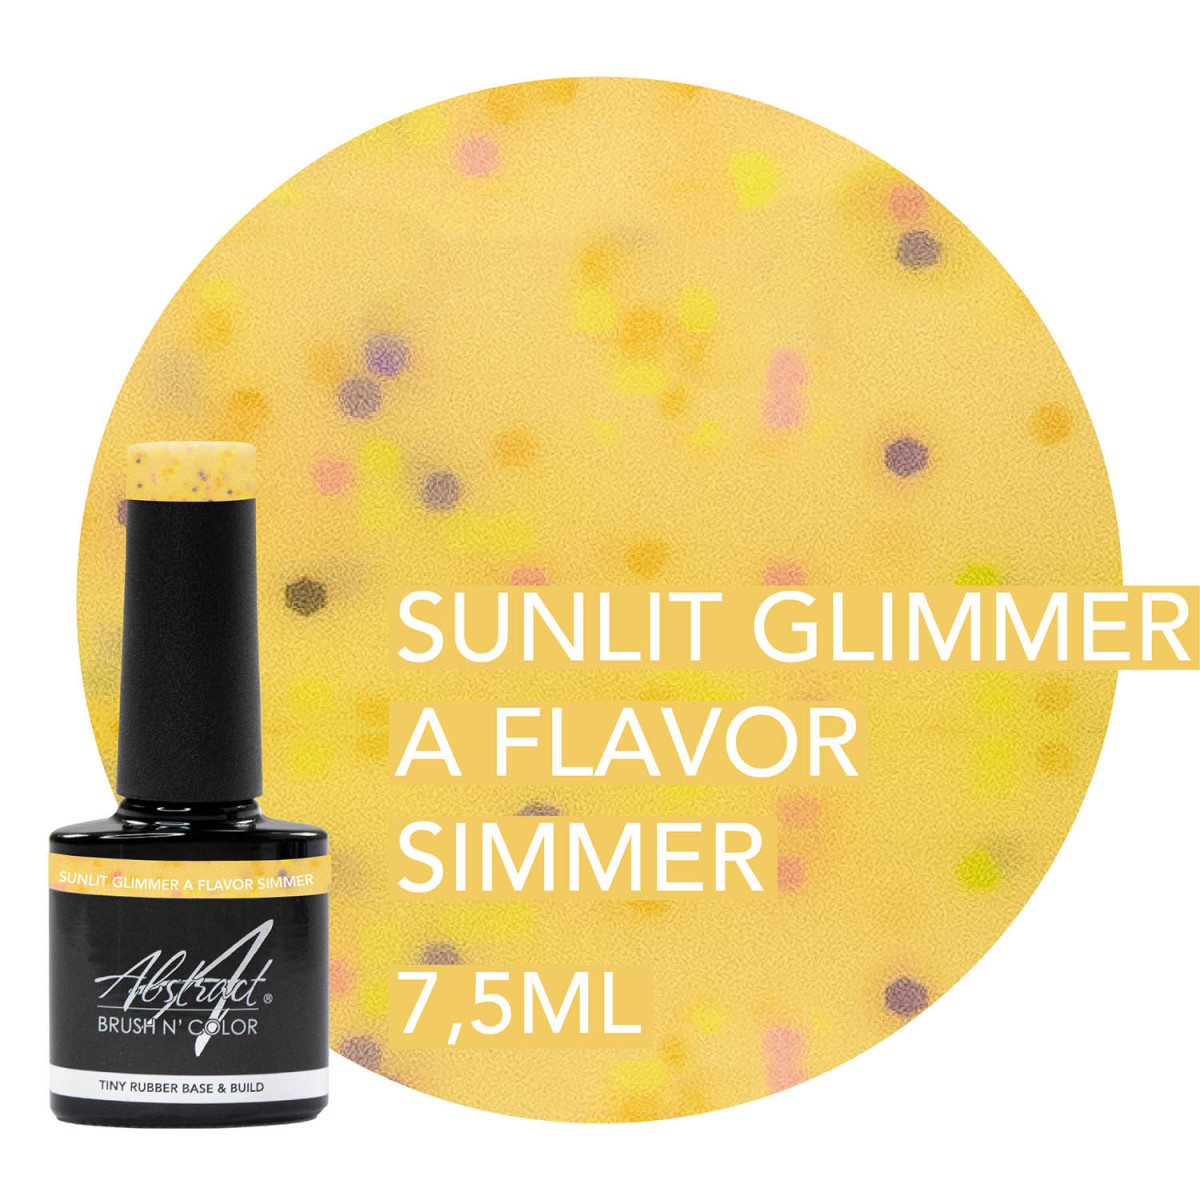 PRE-ORDER Sunlit Glimmer A Flavor Simmer - TINY Rubber Base & Build Gel Abstract